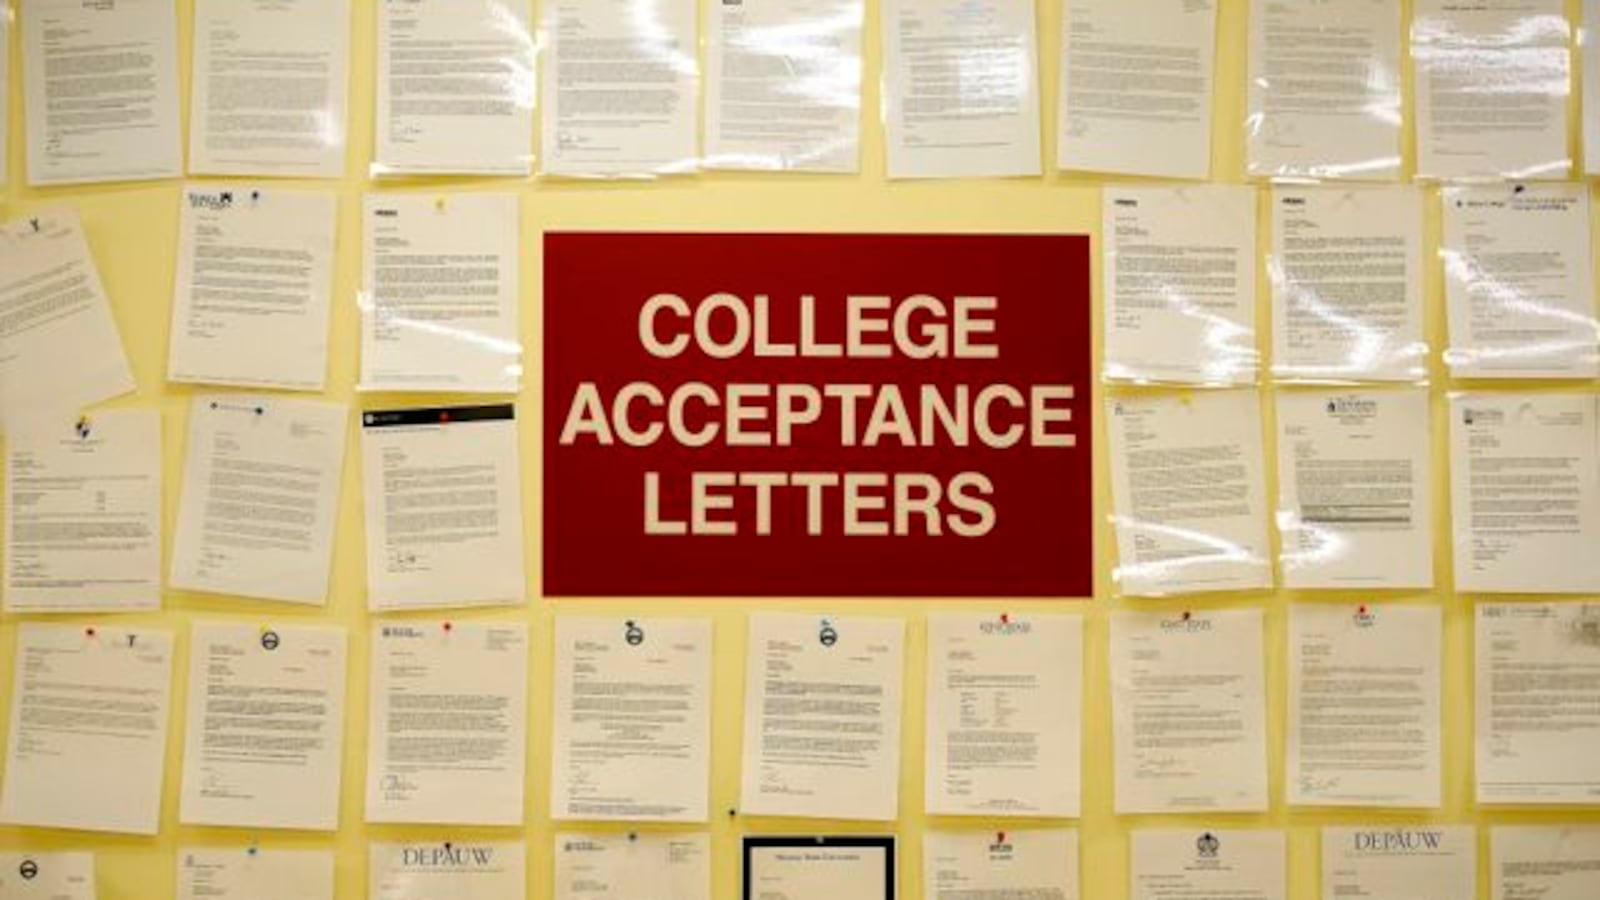 College acceptance letters in the main entrance at Tindley Accelerated School.